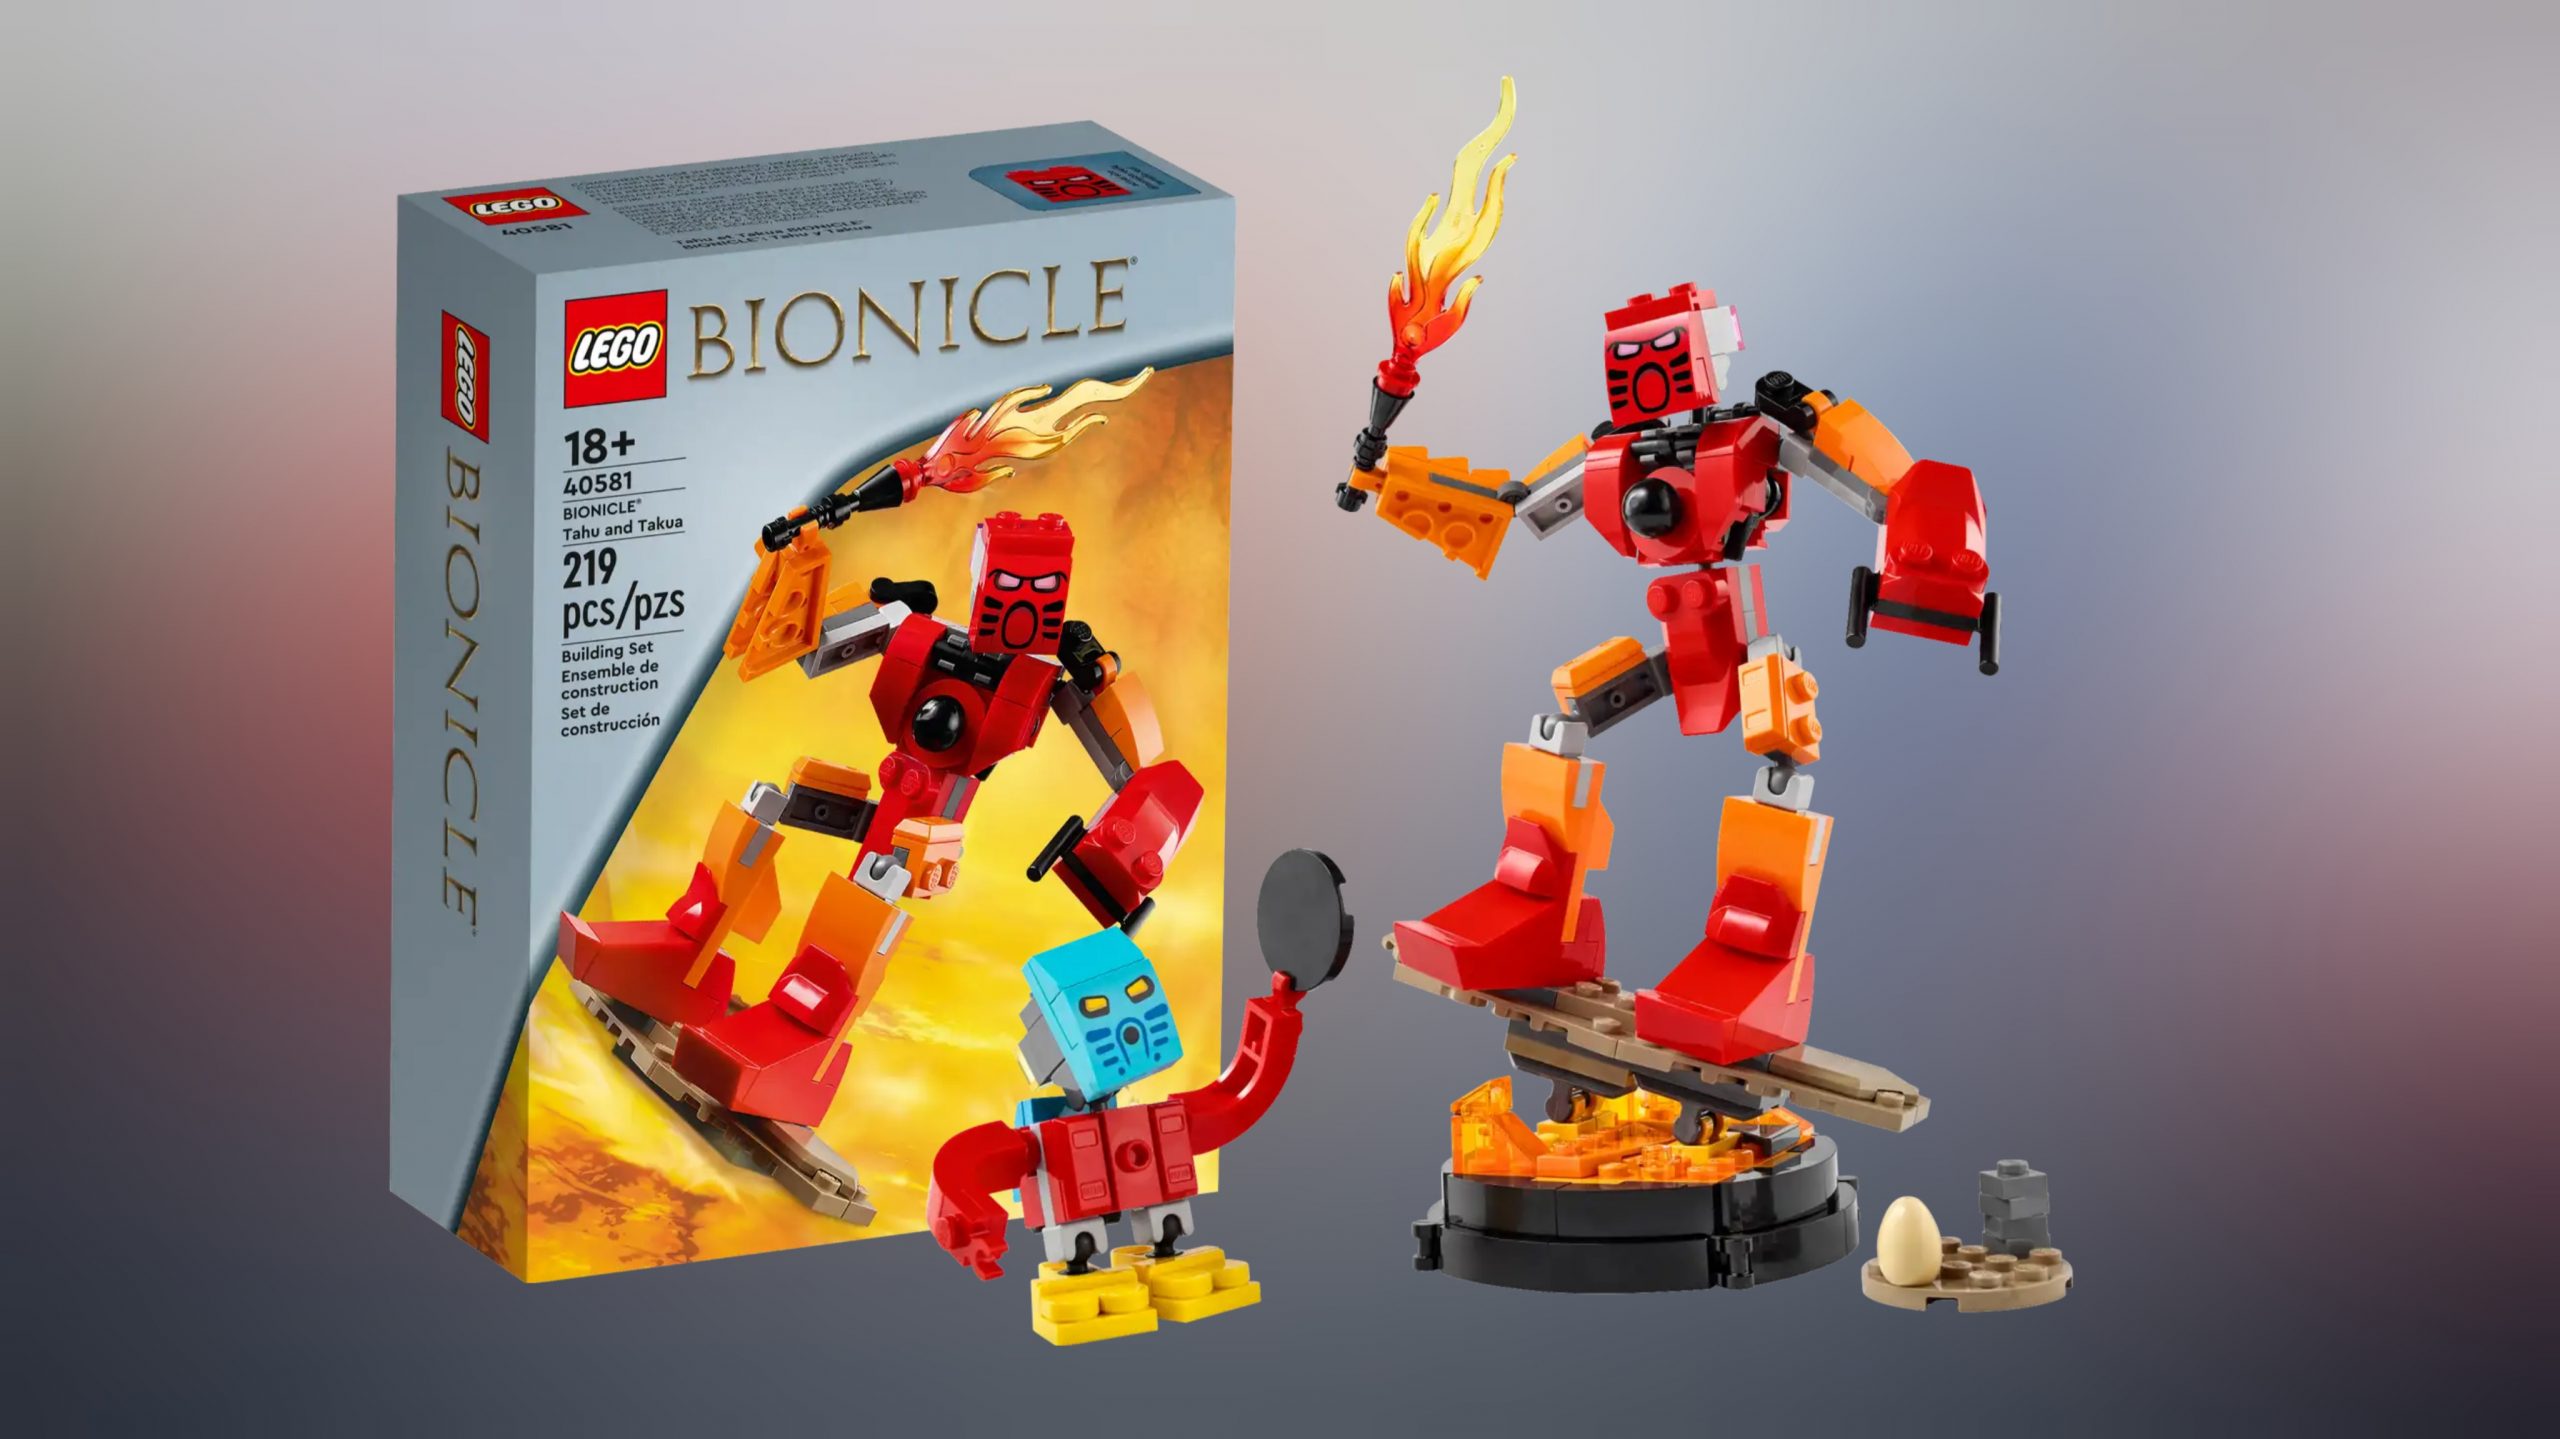 LEGO BIONICLE Tahu and Takua (40581) GWP Now Available! The Brick Post!